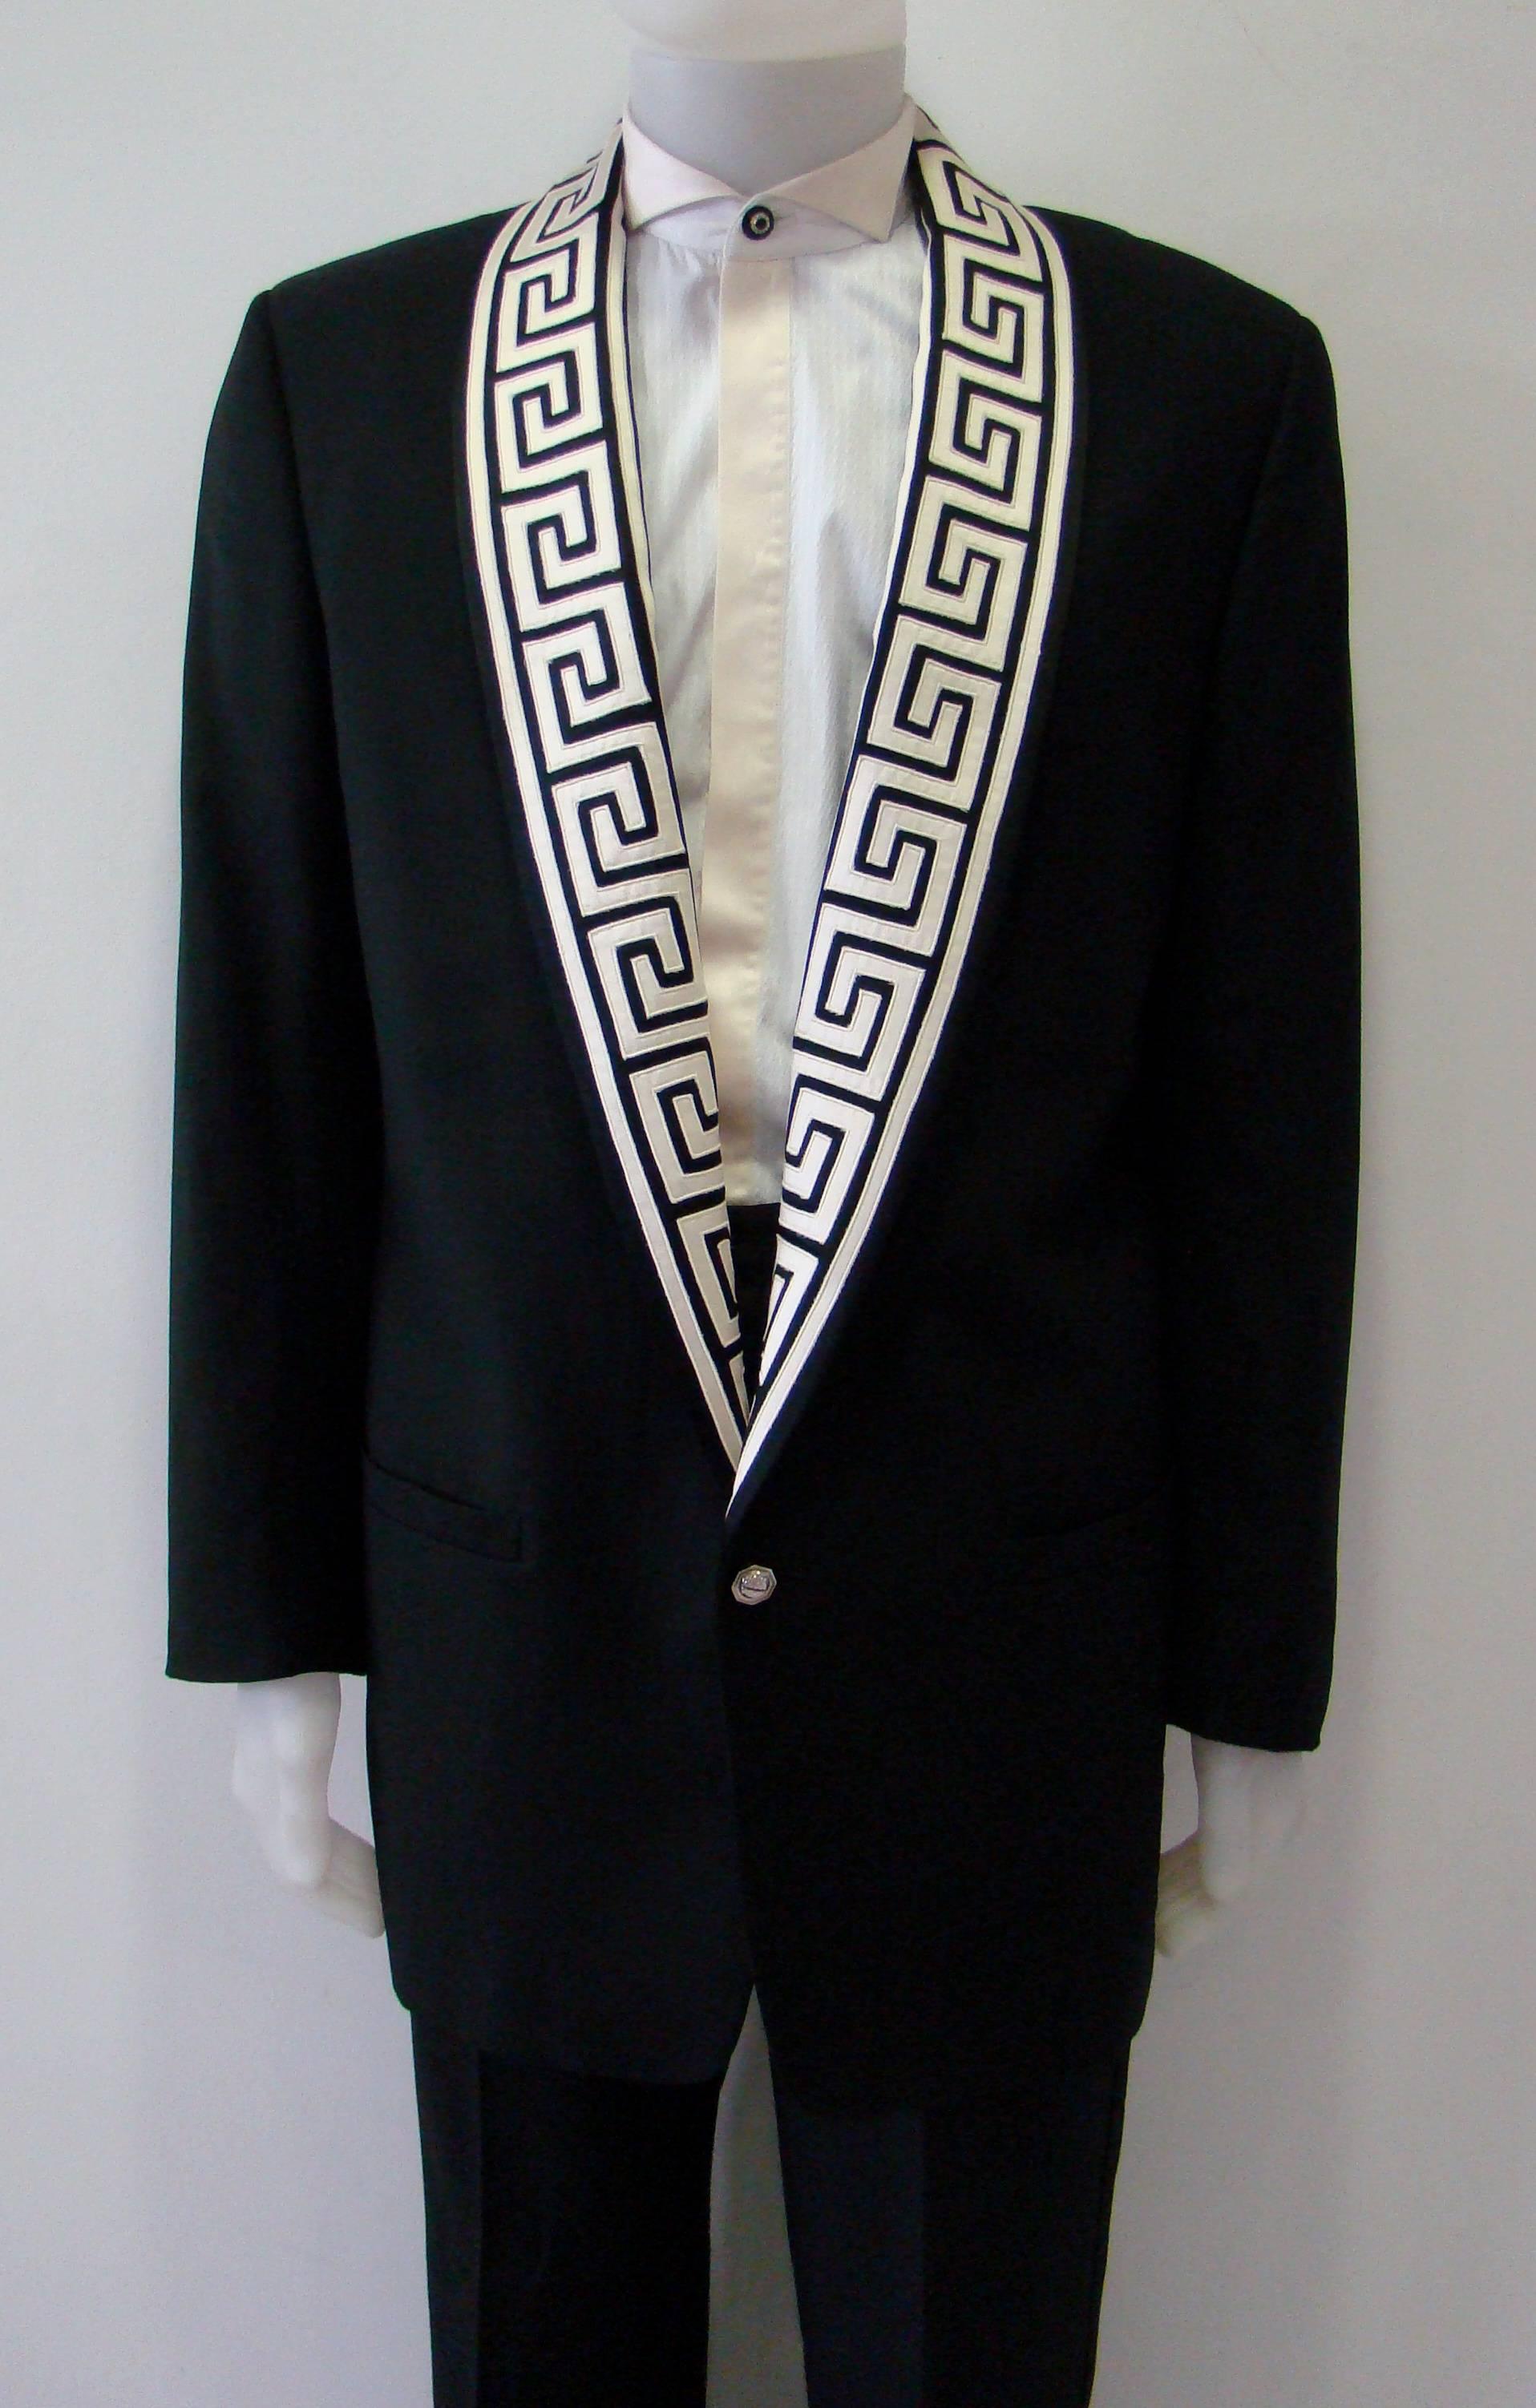 Museum Quality Gianni Versace Greca Detail Jacket. Expertly Crafted From Soft Virgin Wool This Piece Is Tailored Into Single Breasted Jacket Featuring Two Front Welt Pockets, Two Unfunctional Buttons At Cuffs, And An Eye Catching Shawl Lapel With